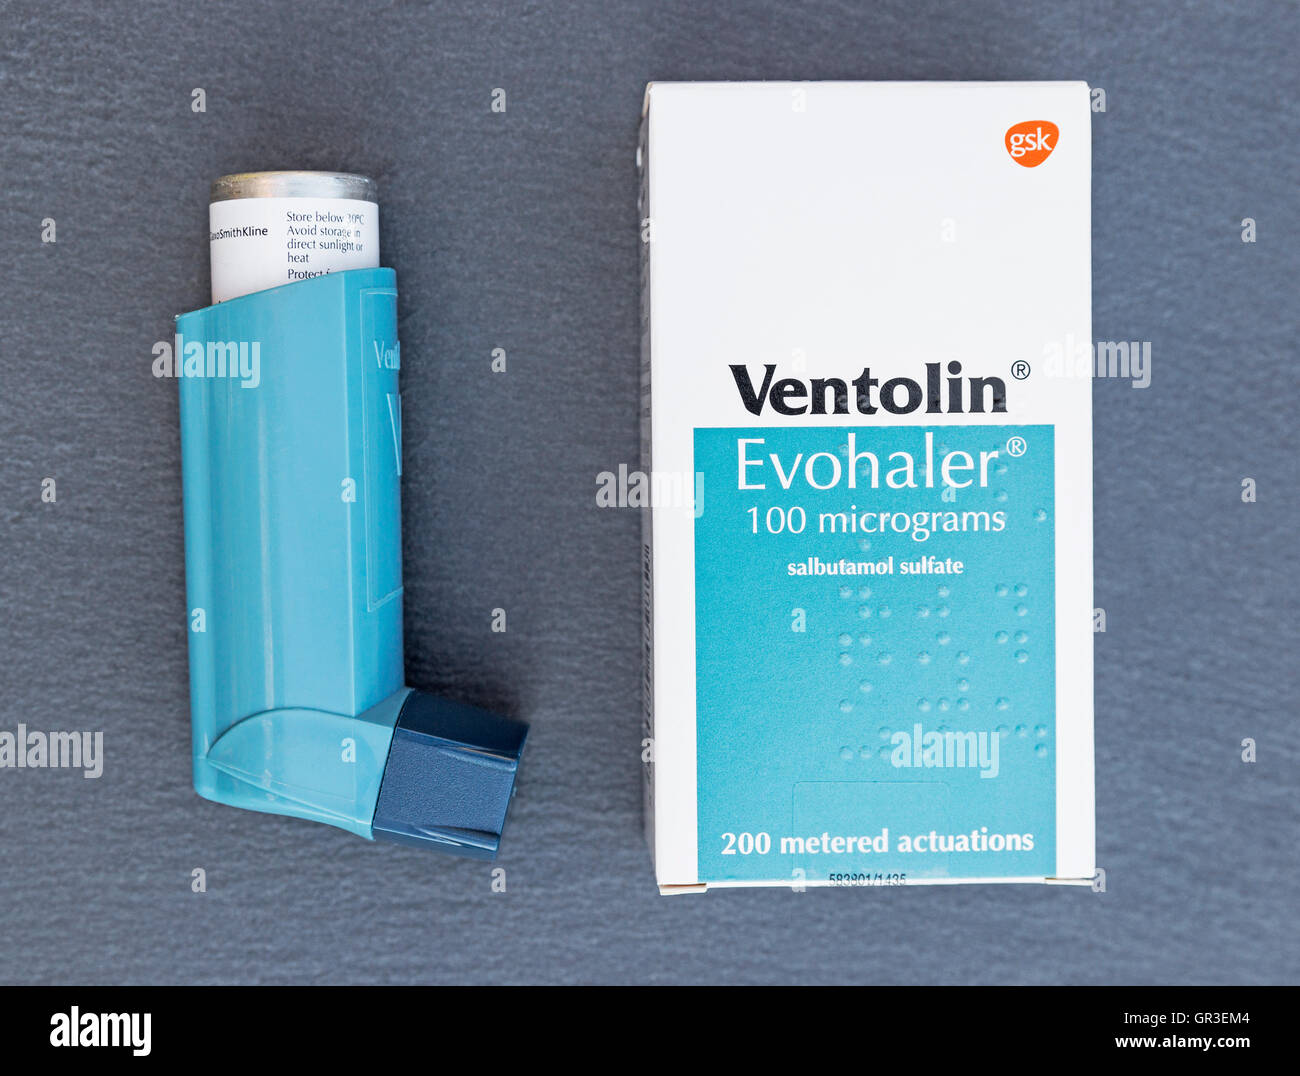 Ventolin High Resolution Stock Photography and Images - Alamy